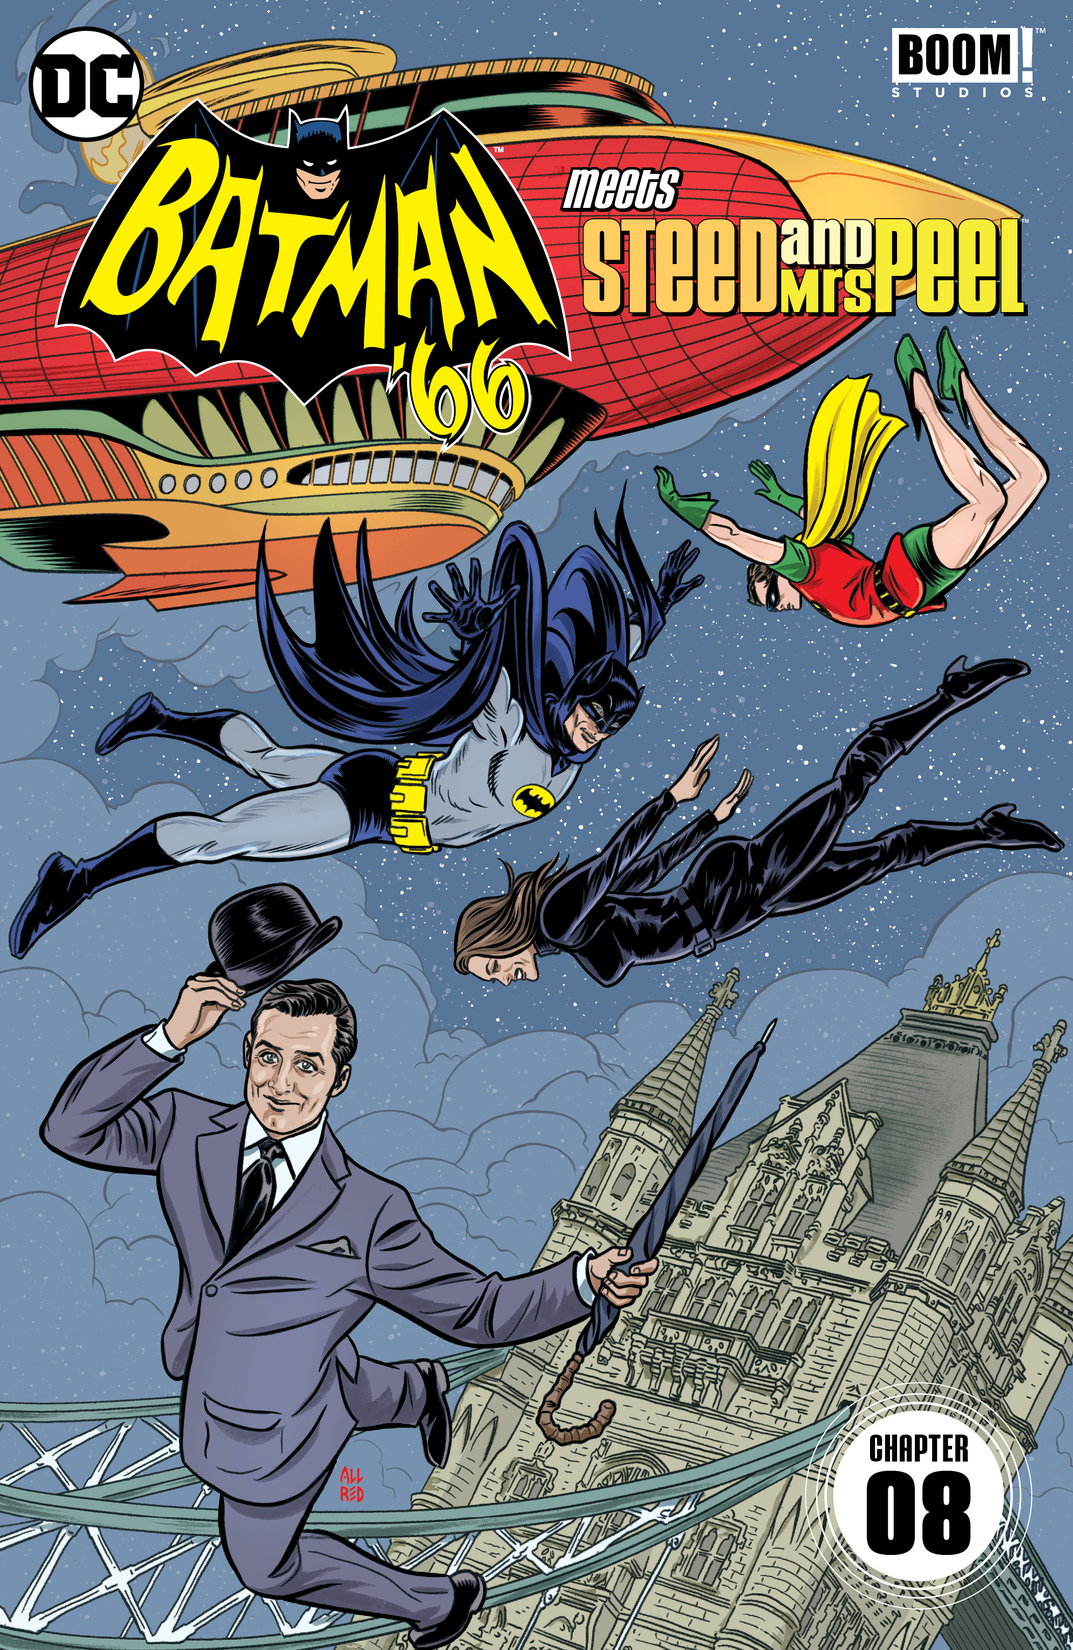 Batman '66 Meets Steed and Mrs Peel #8 preview images